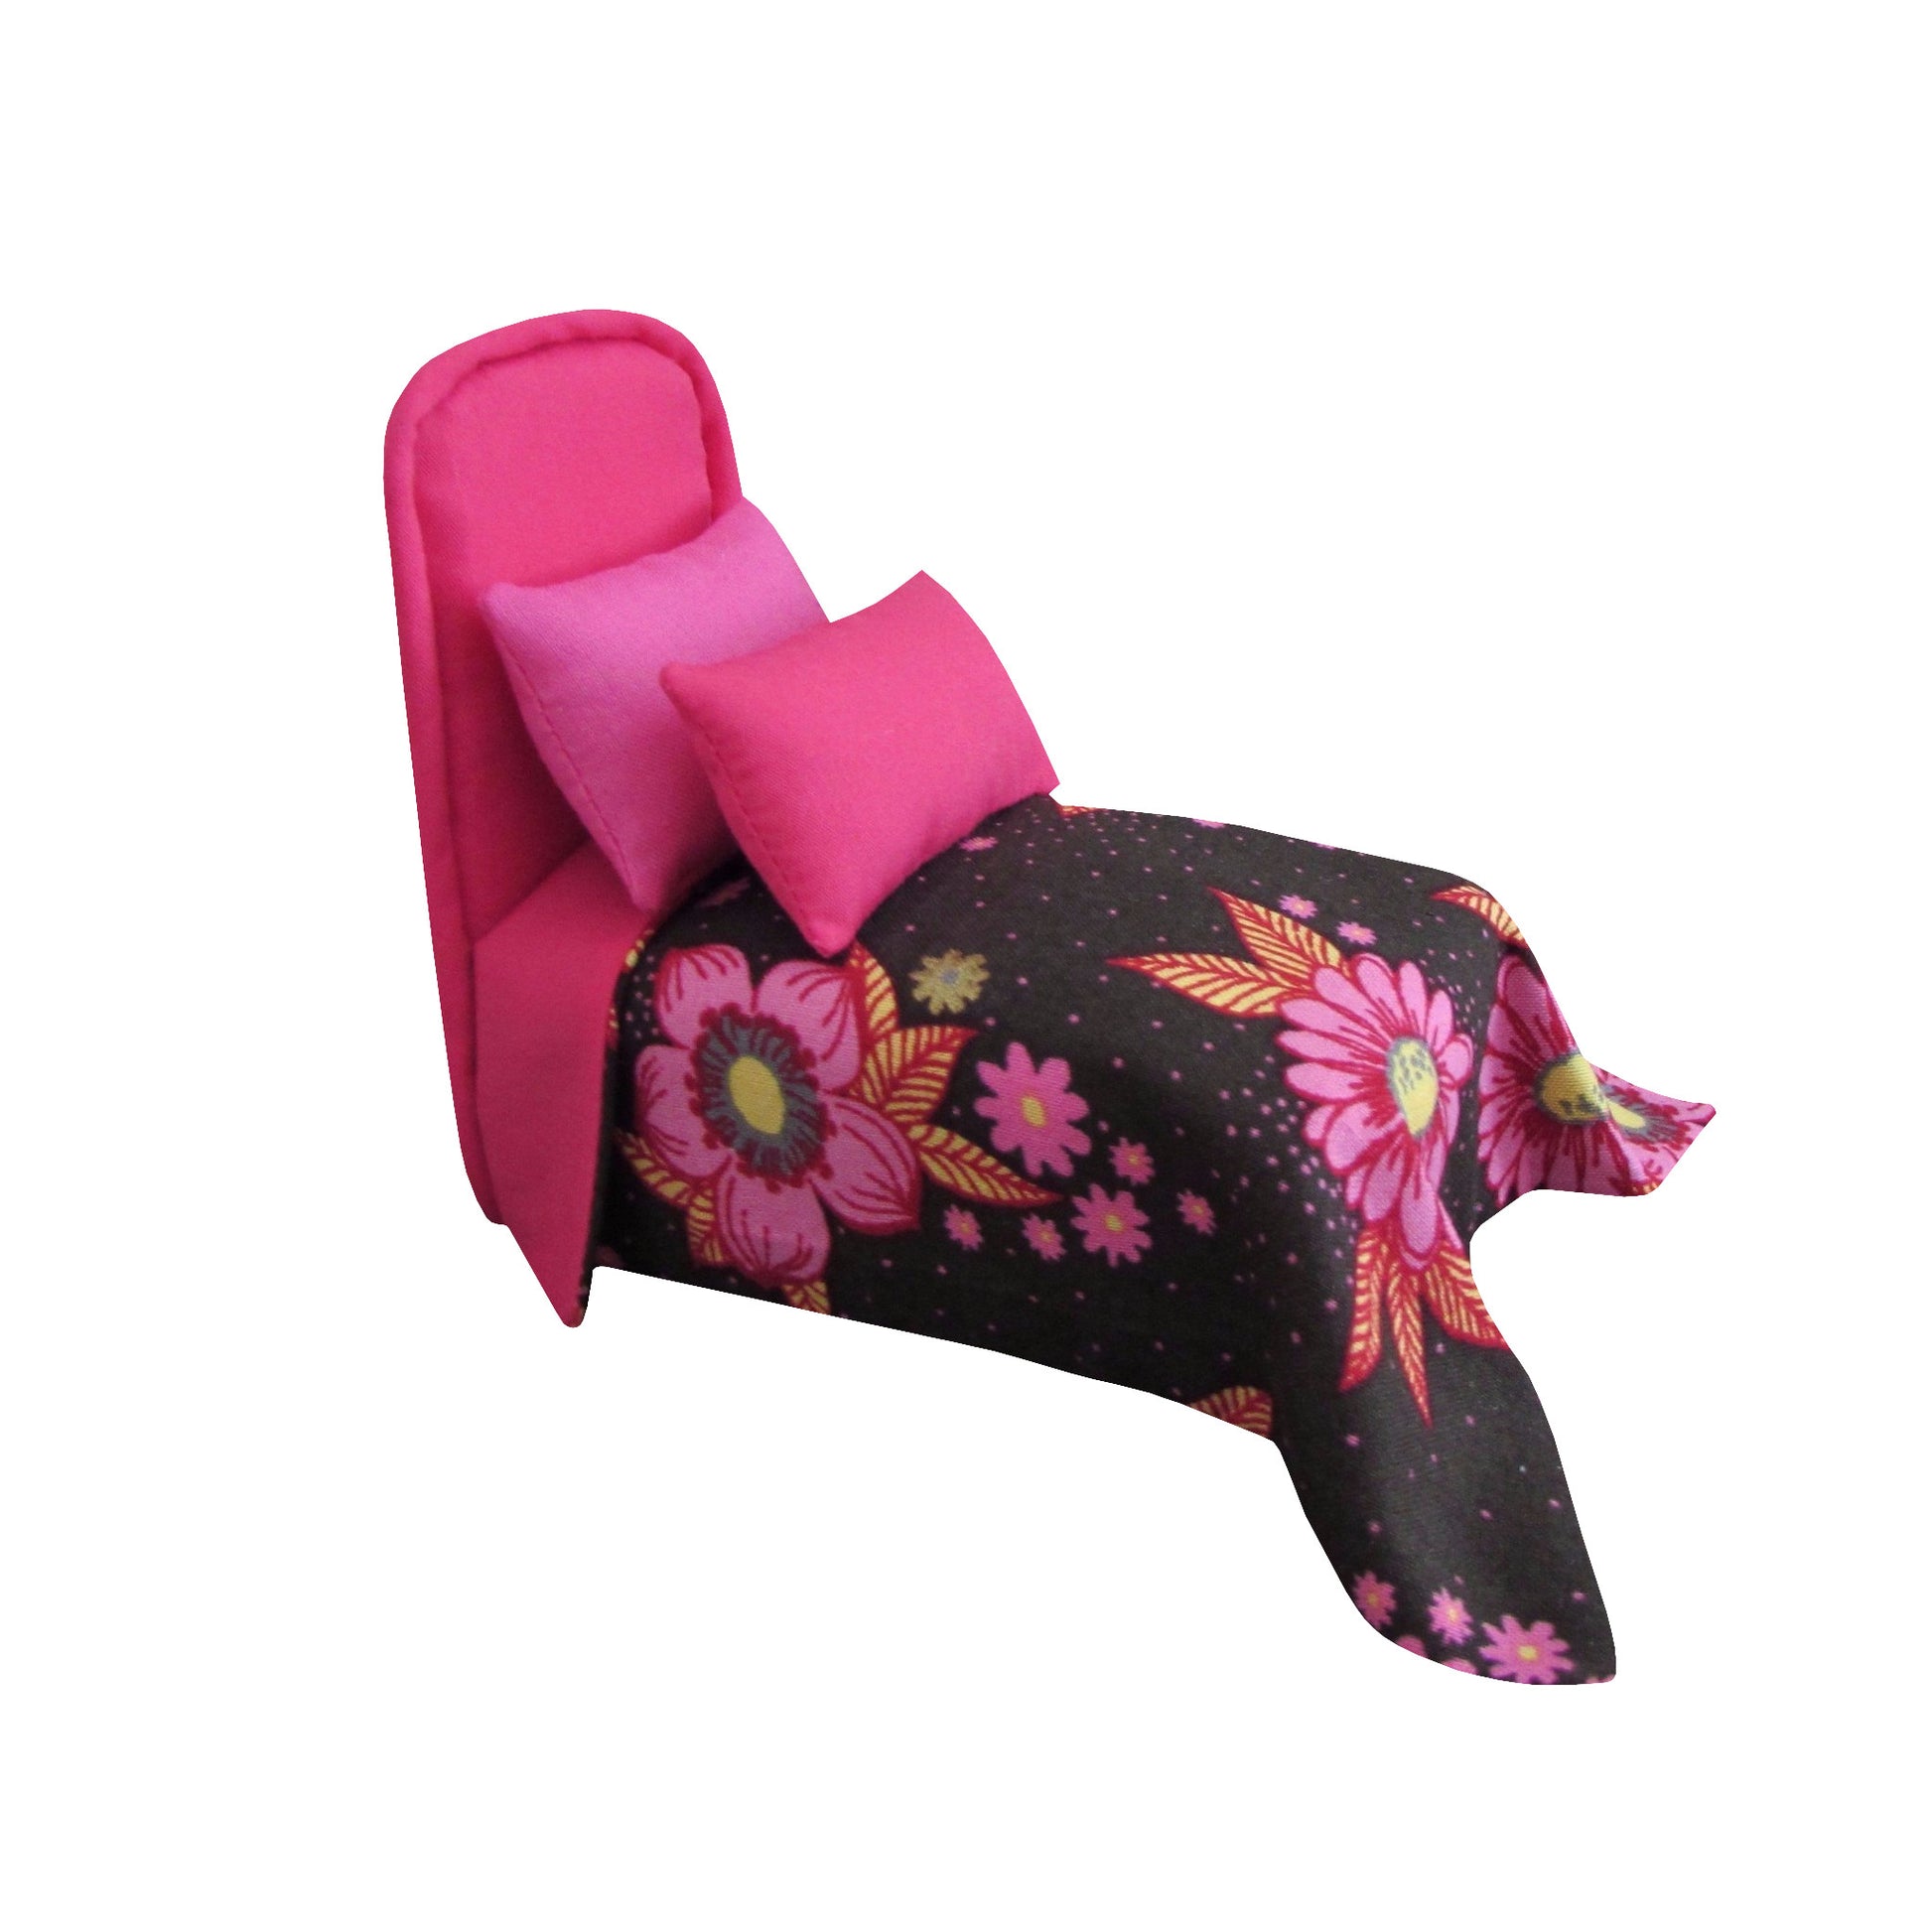 Bright Pink Upholstered Doll Bed with Floral Bedspread for 3-inch dolls